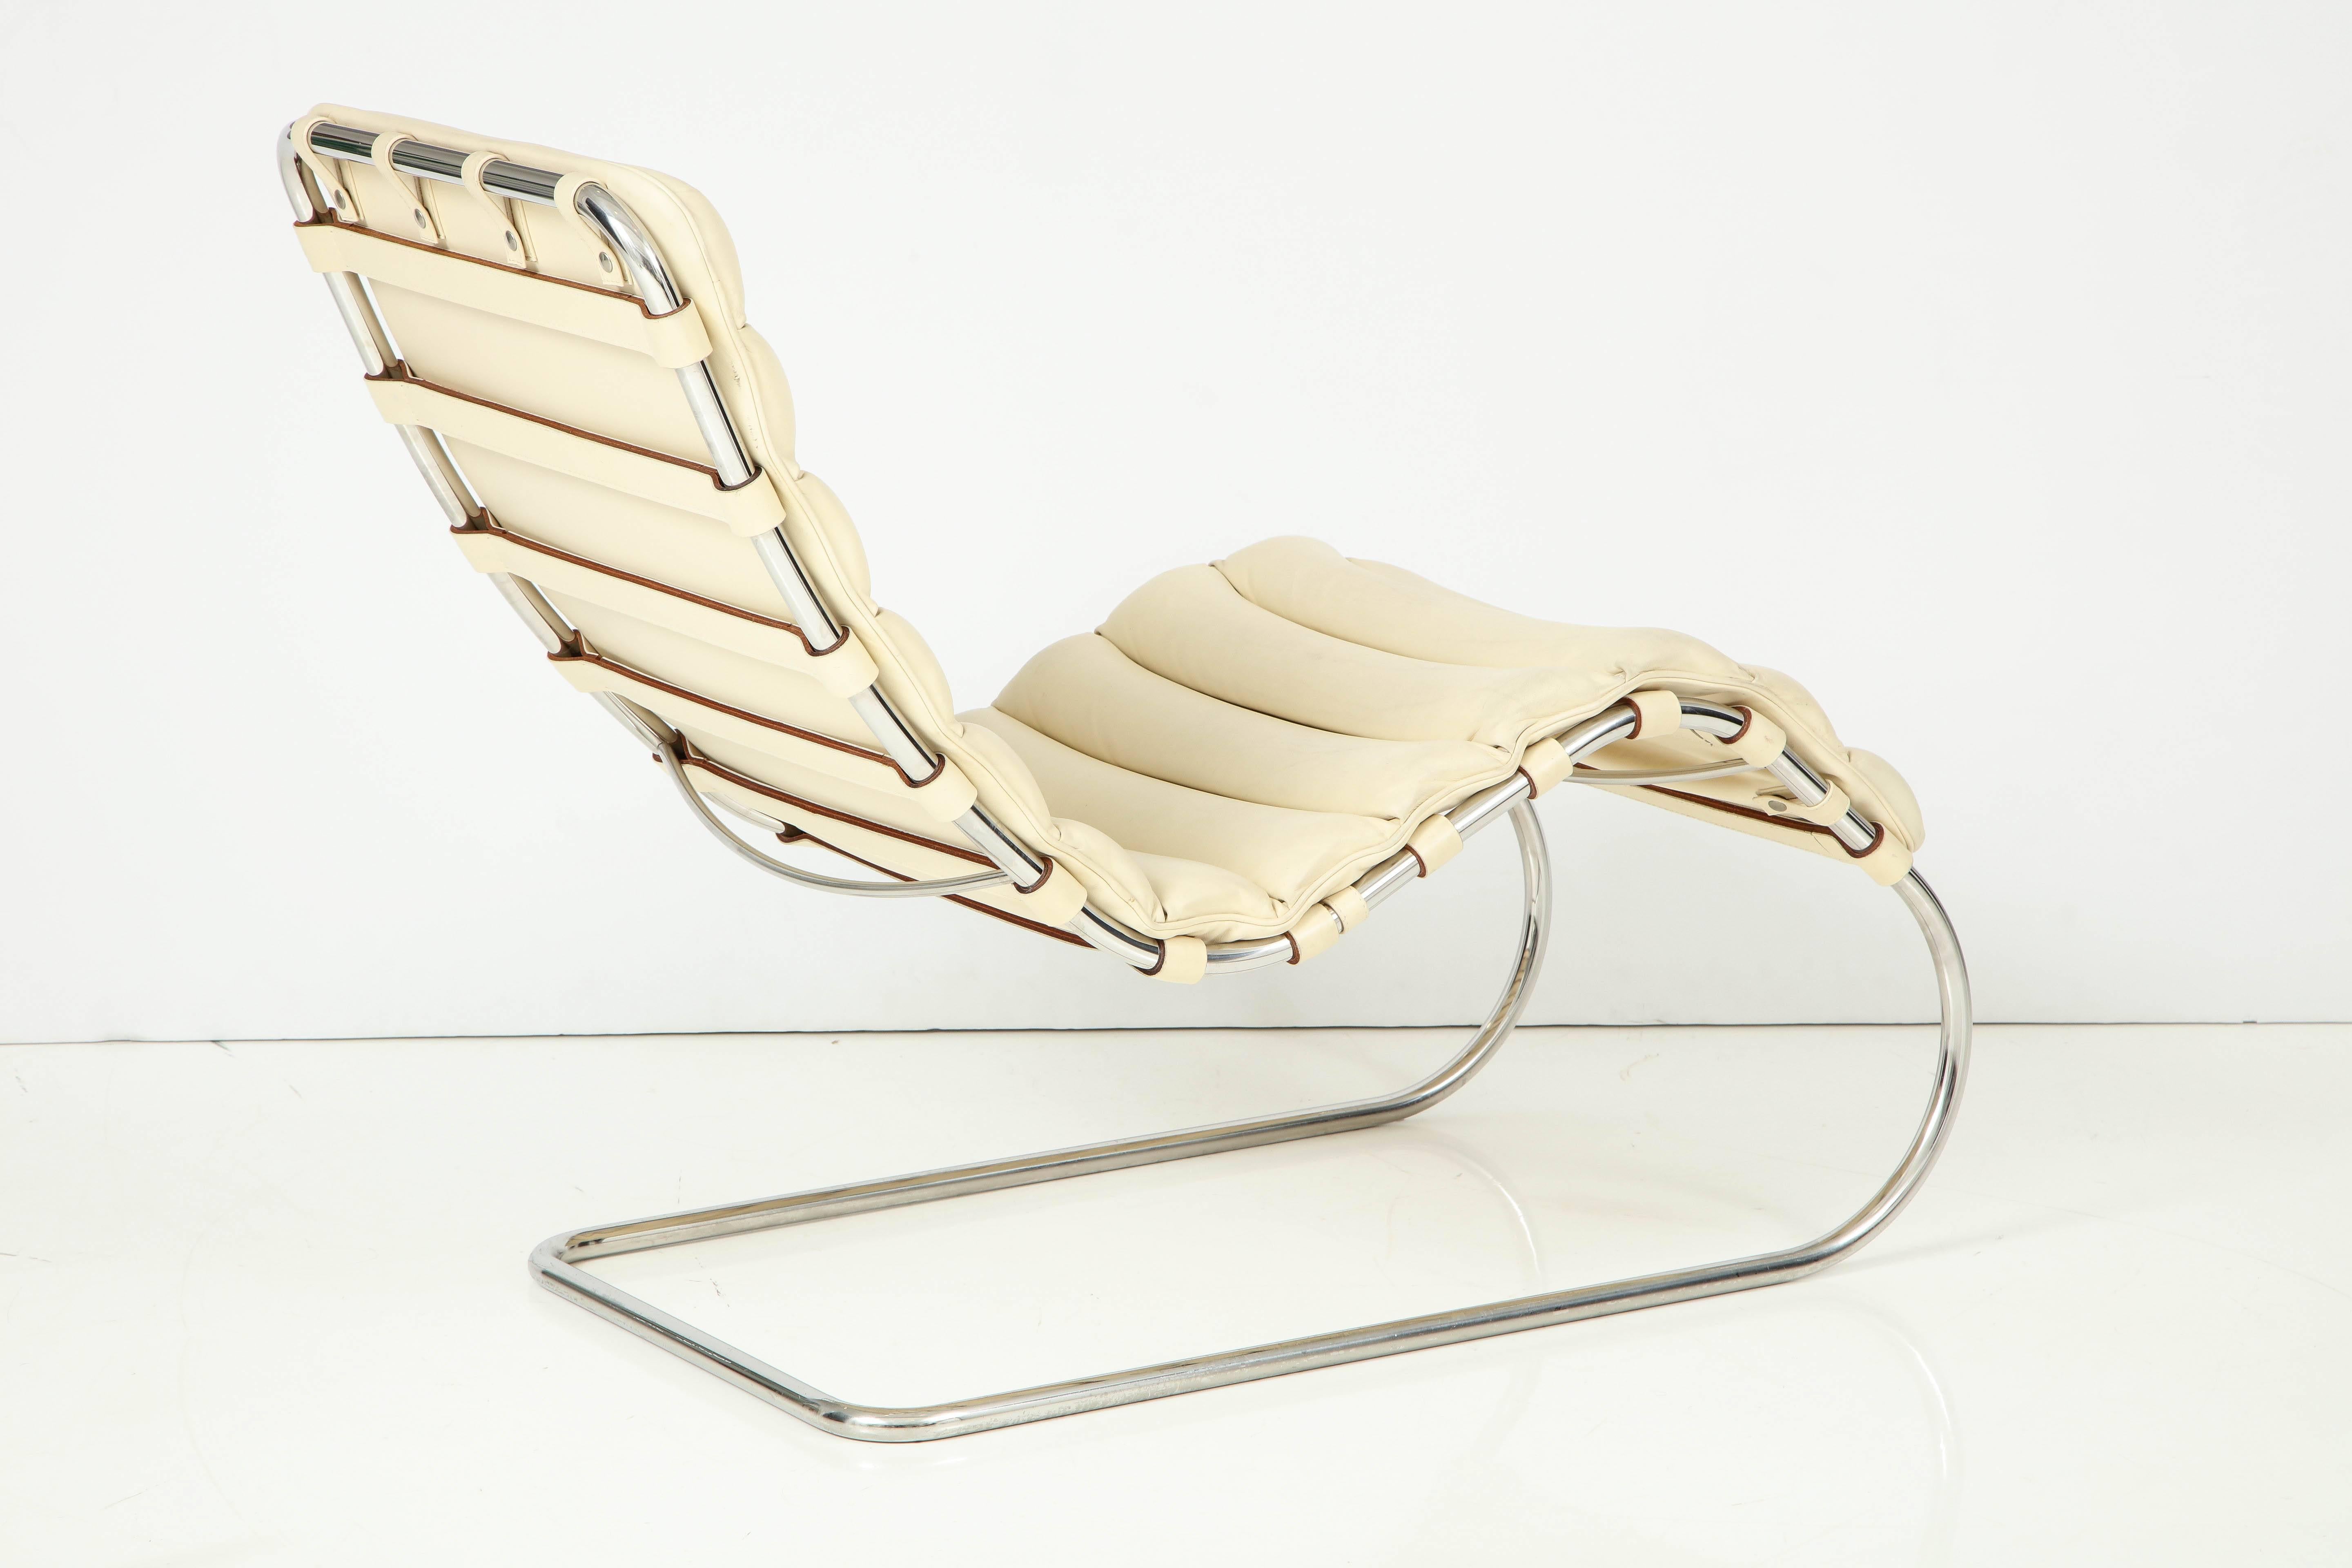 American Ludwig Mies van der Rohe MR Chaise for Knoll, circa 1980s